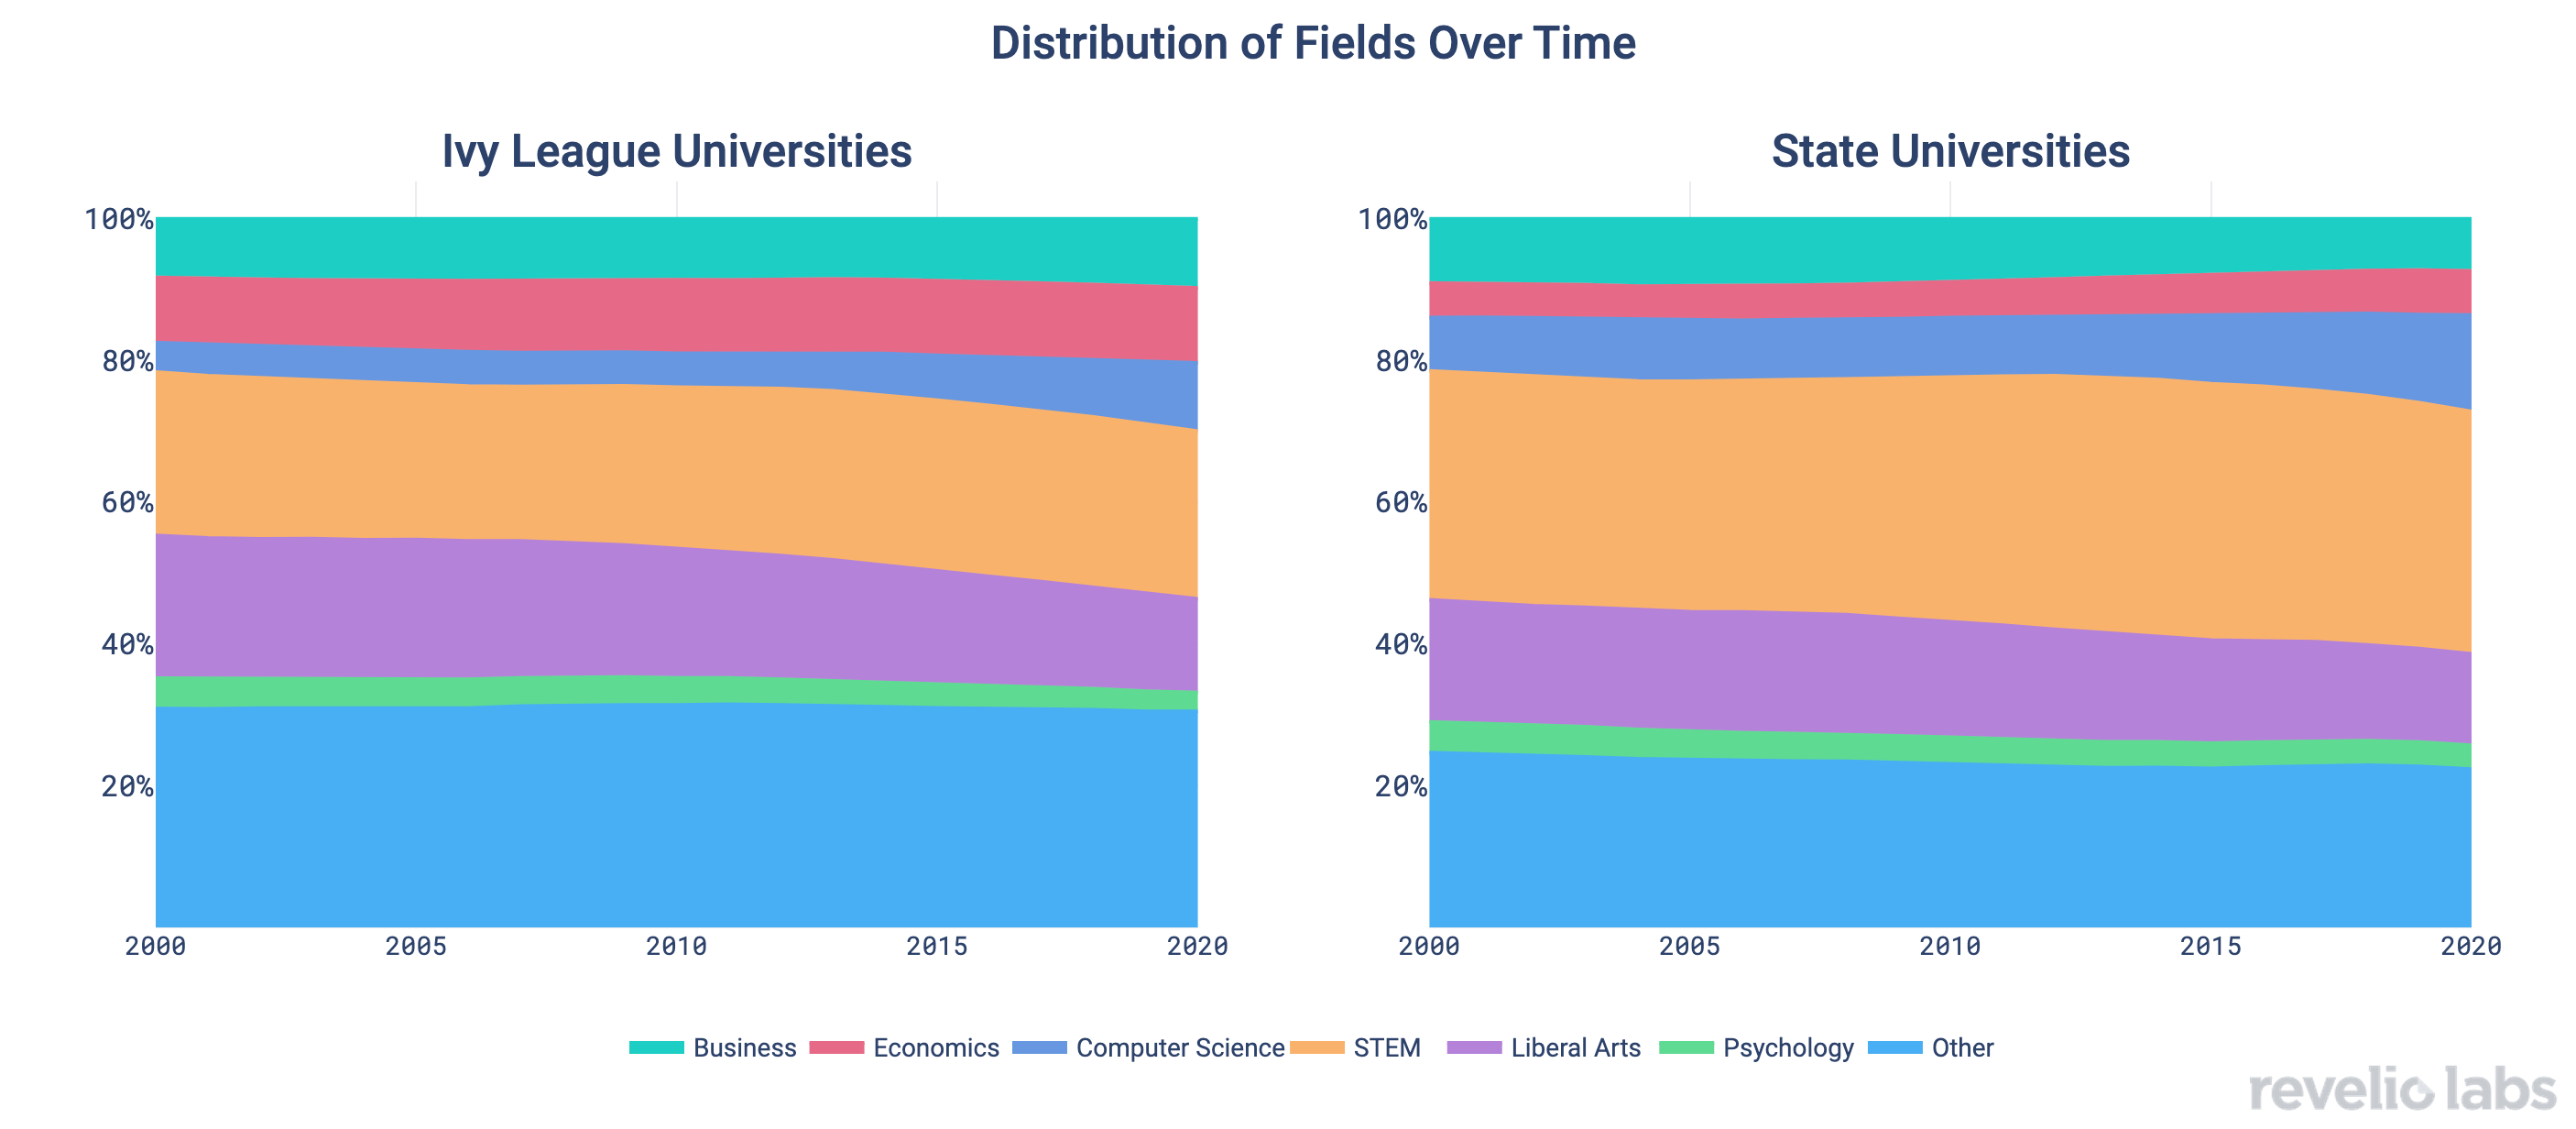 Distribution of Fields Over Time